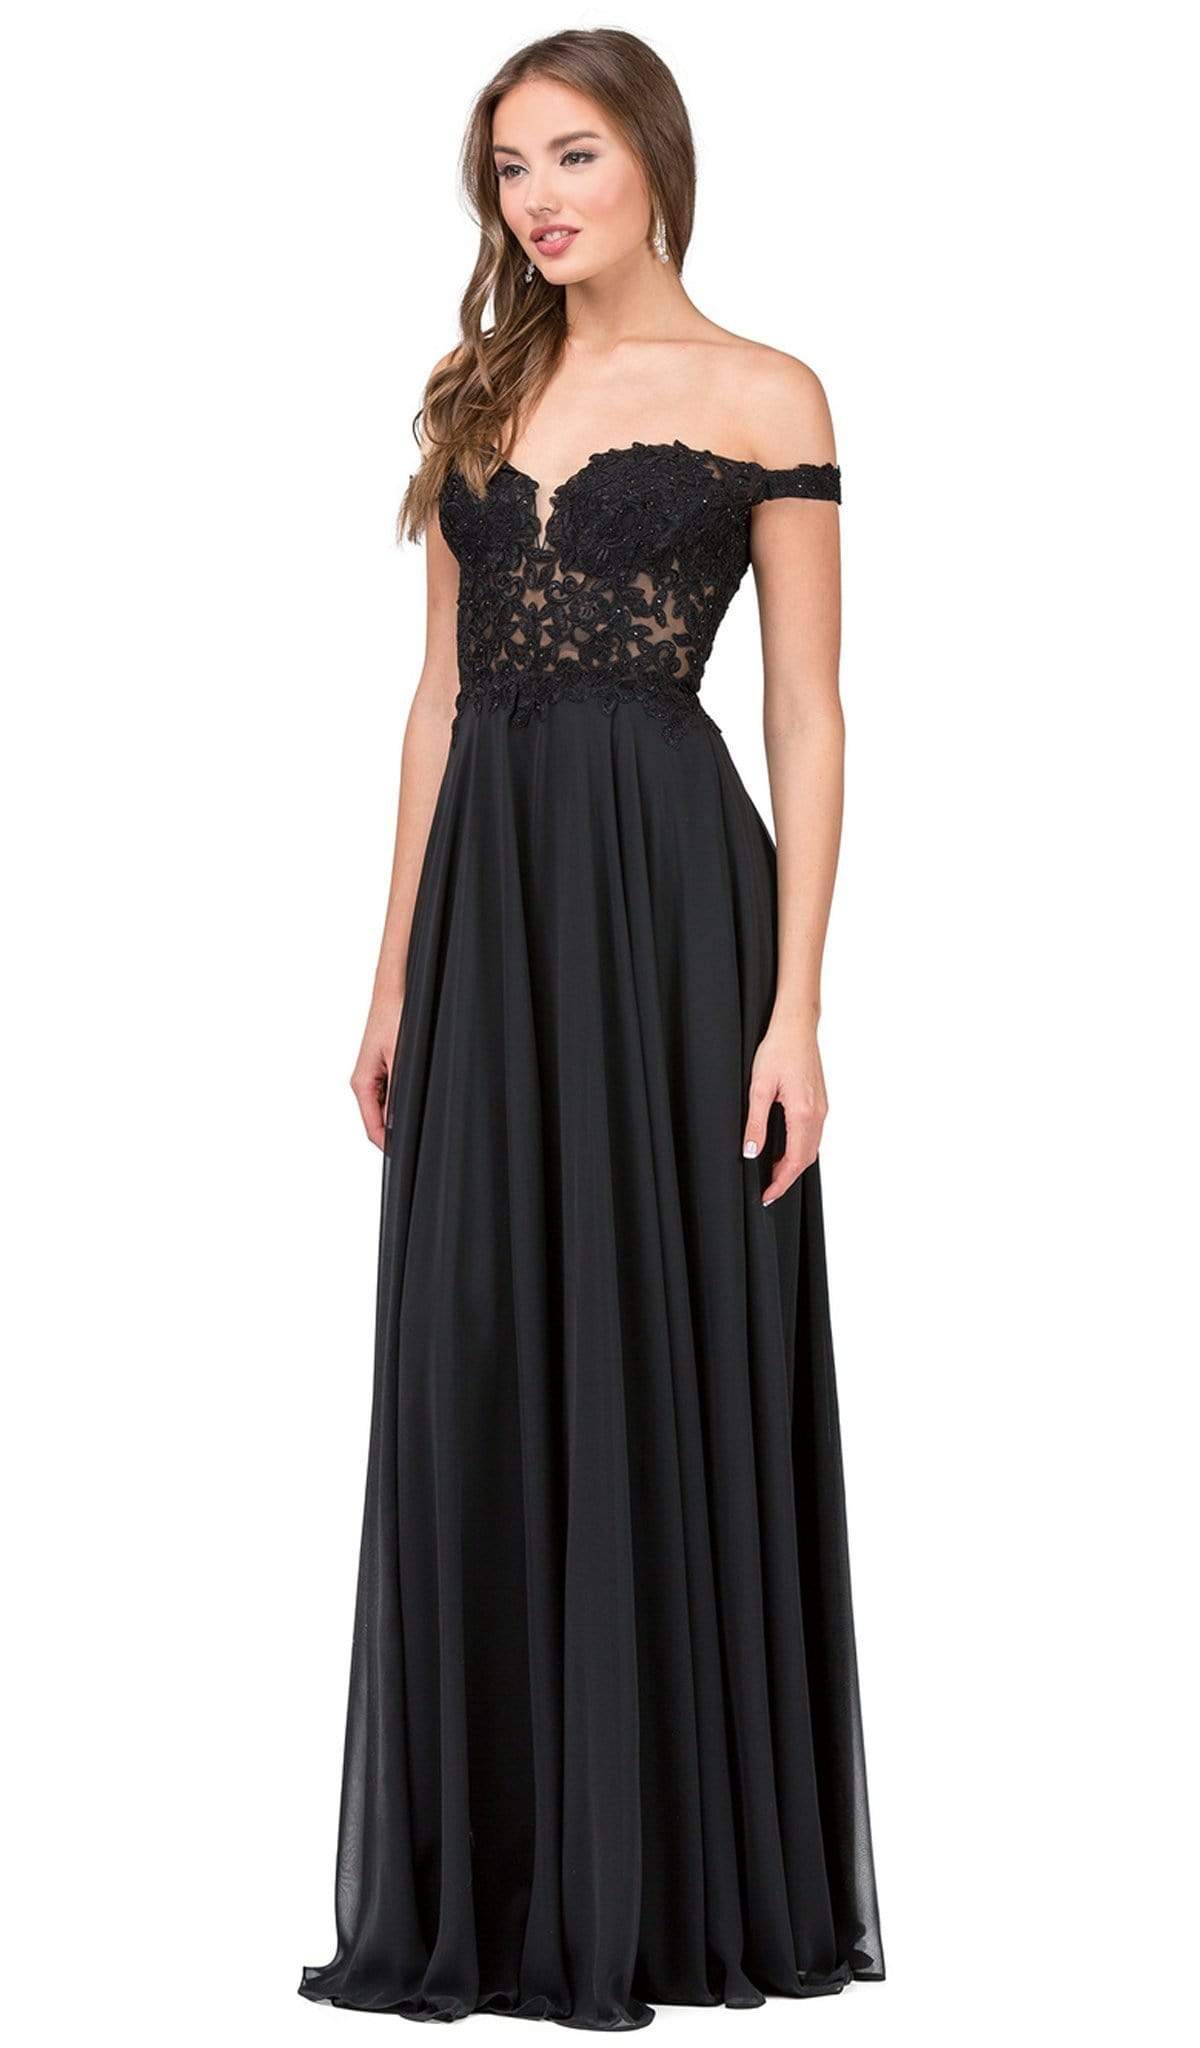 Dancing Queen - 2357 Beaded Off Shoulder Chiffon Prom Dress Special Occasion Dress XS / Black